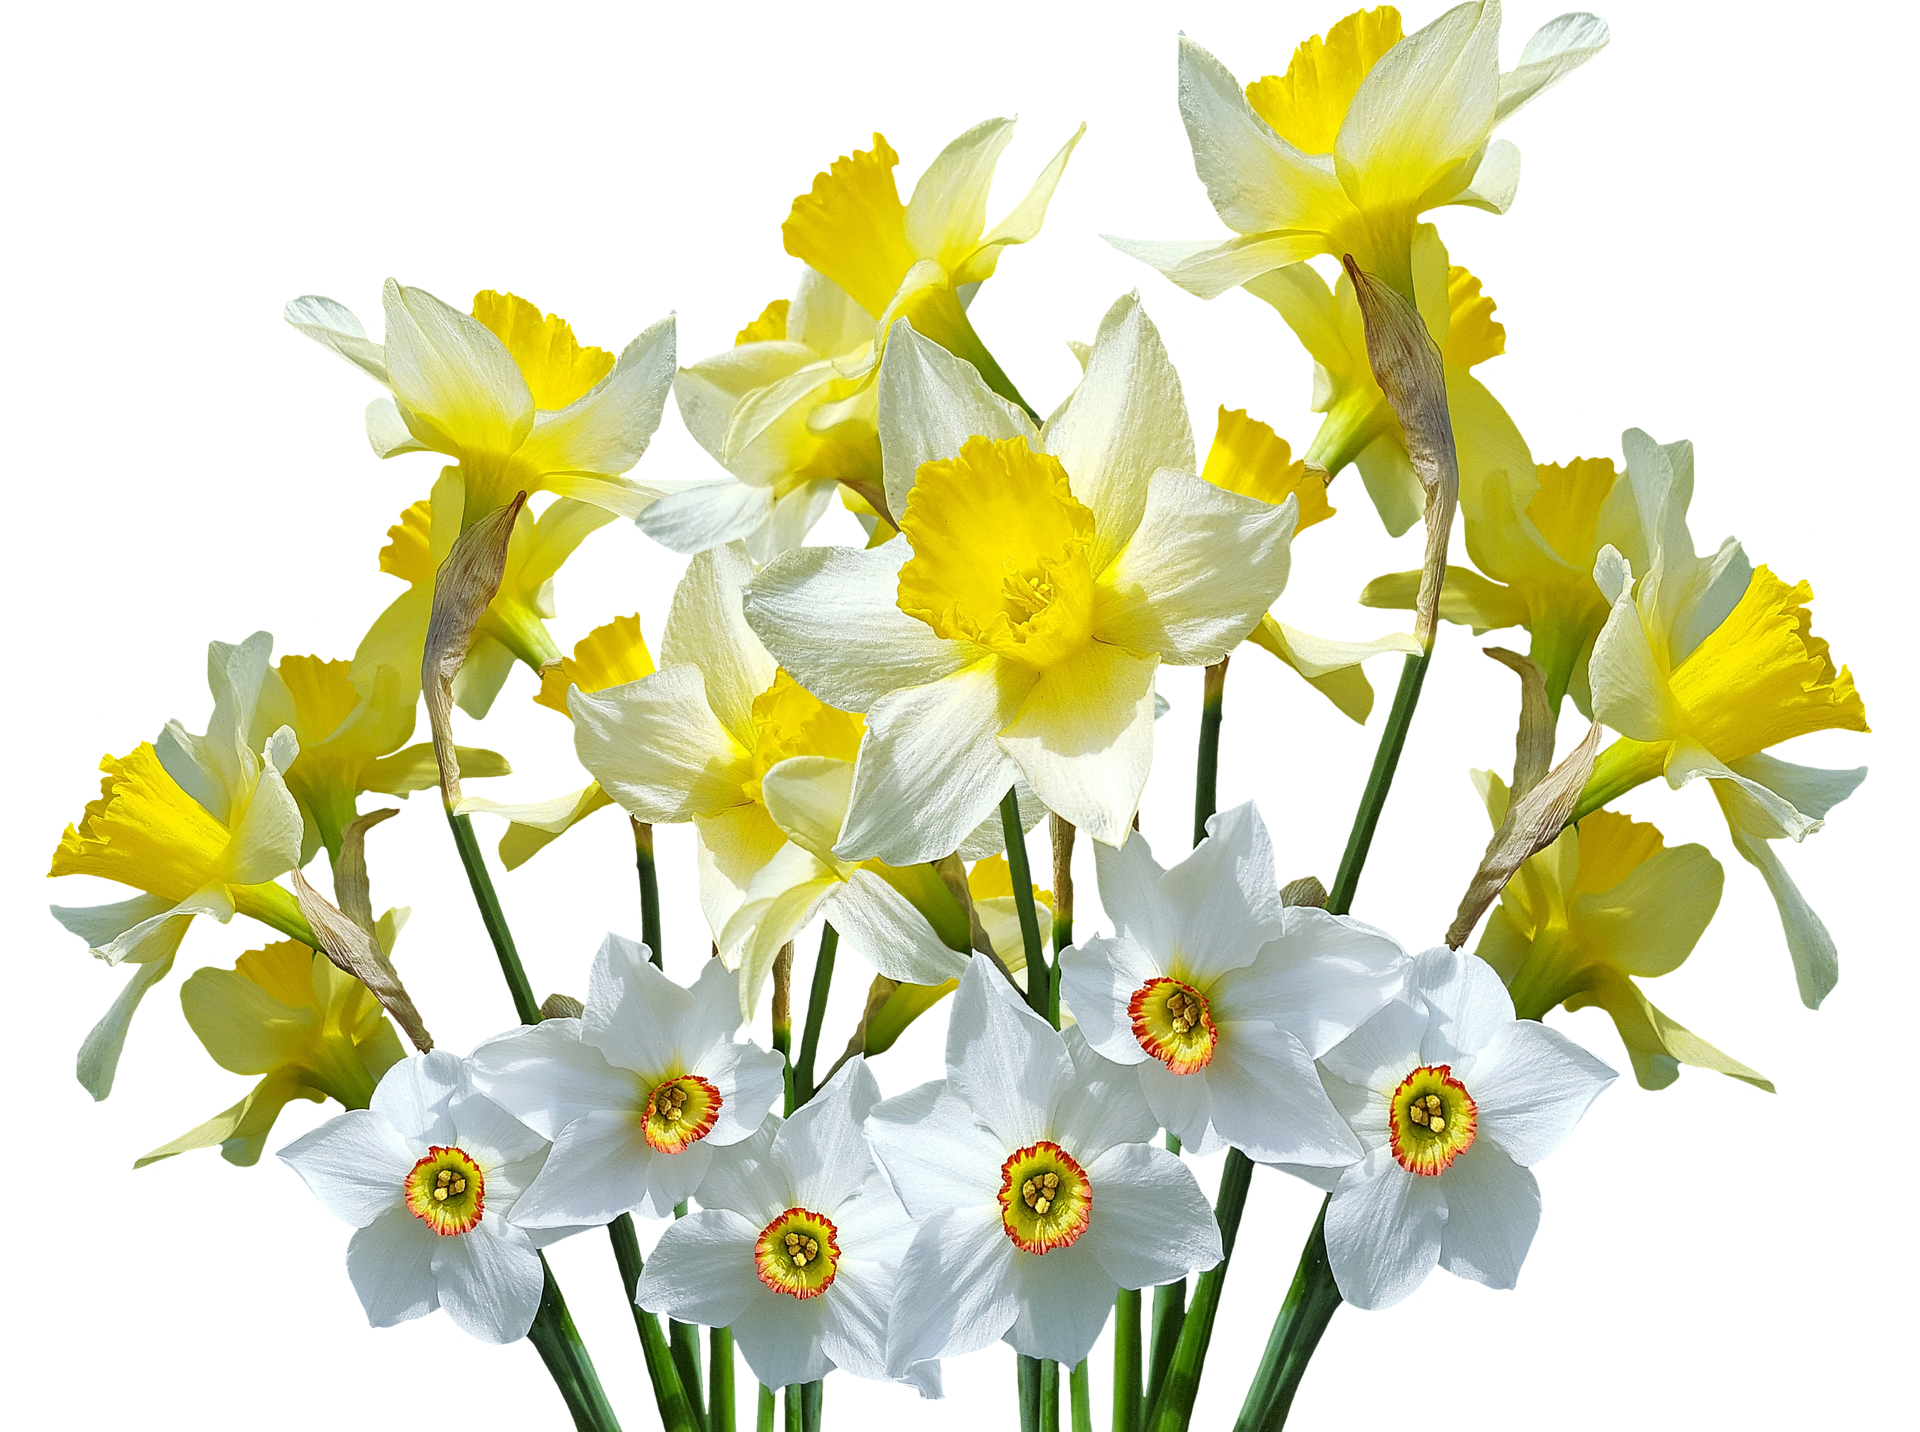 A Group Of White And Yellow Flowers